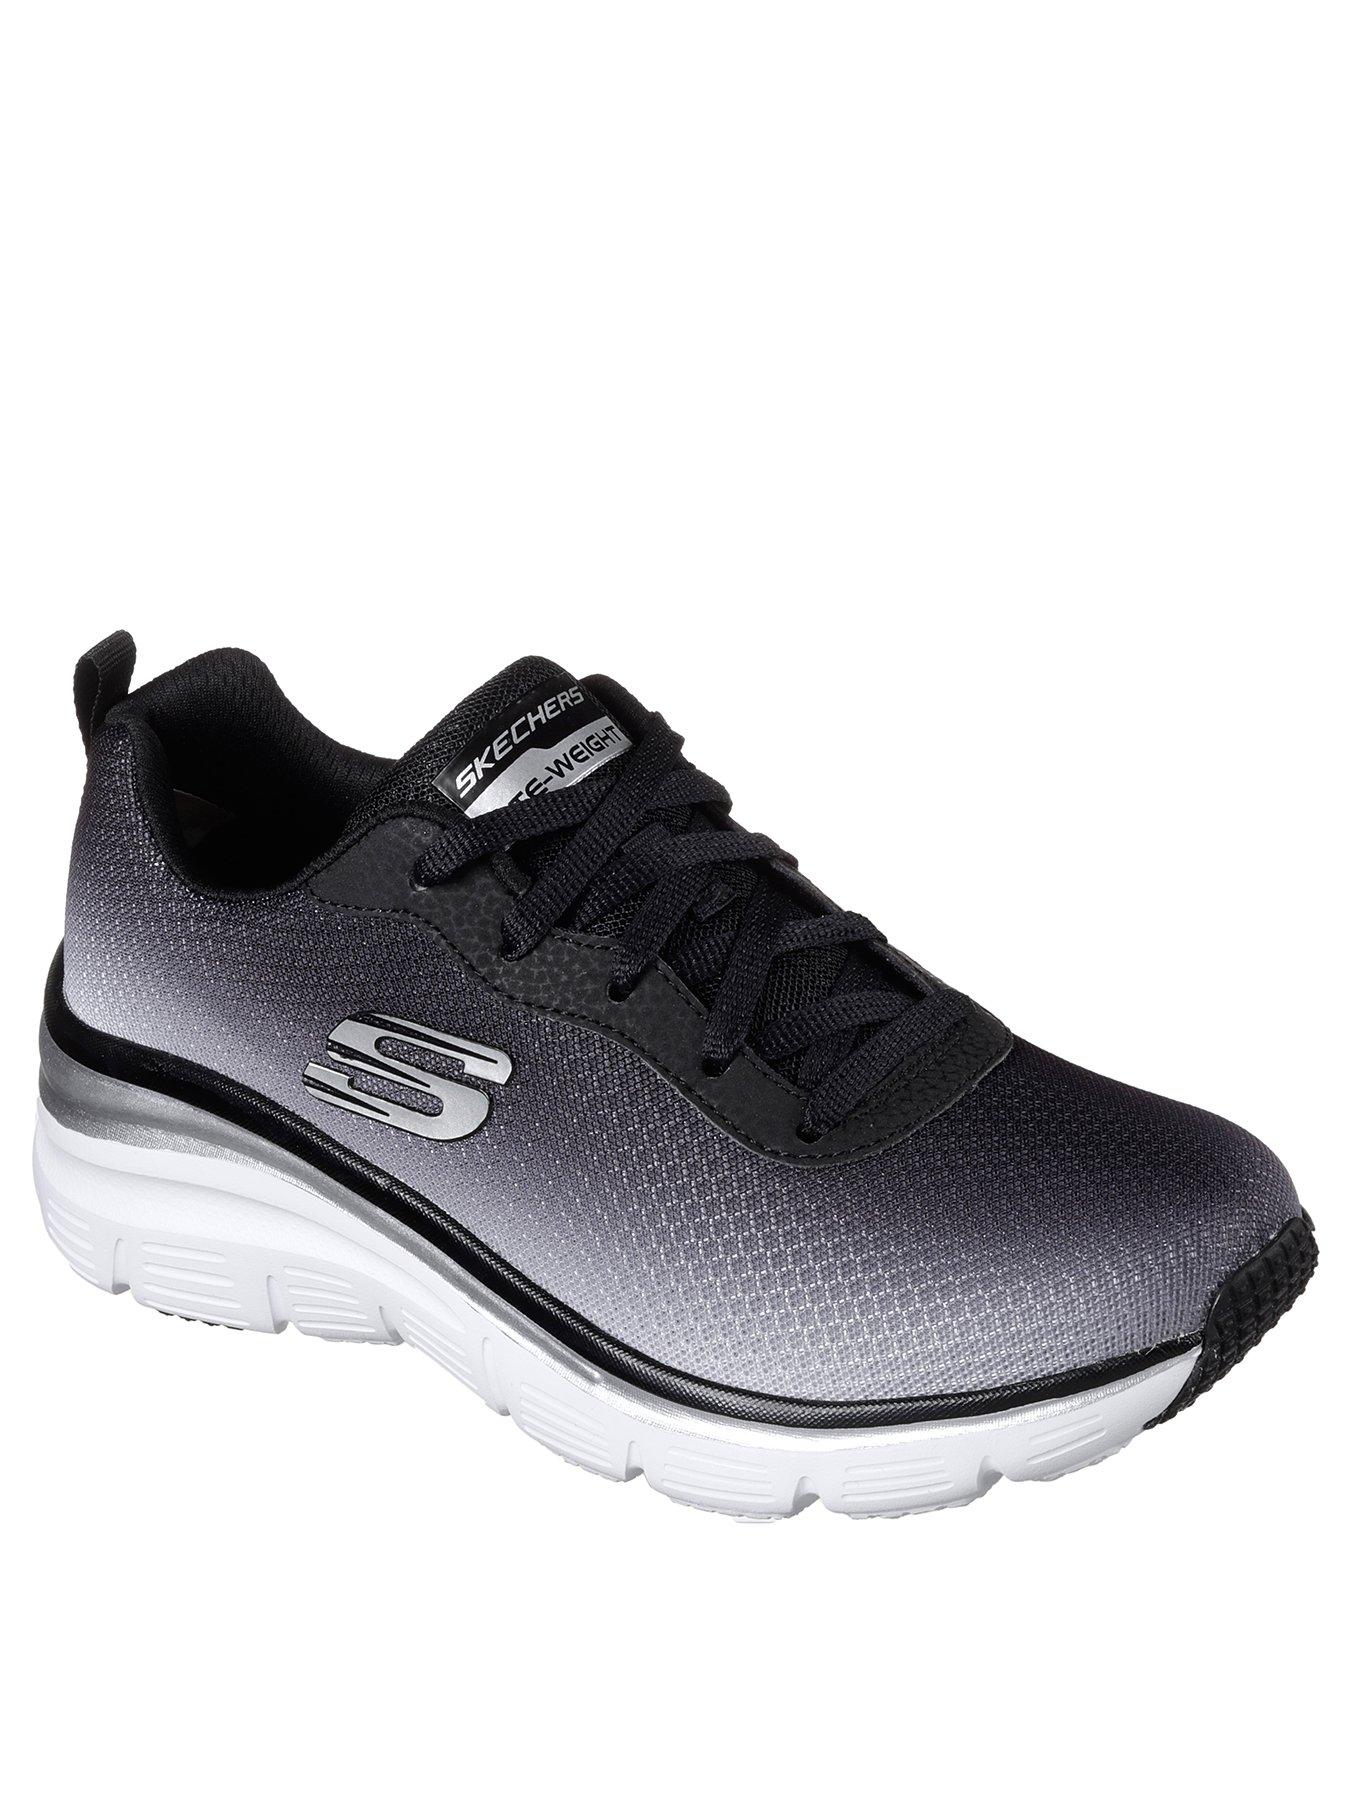  Skechers Fashion Fit Ombre Mesh Lace-up Memory Foam Trainers